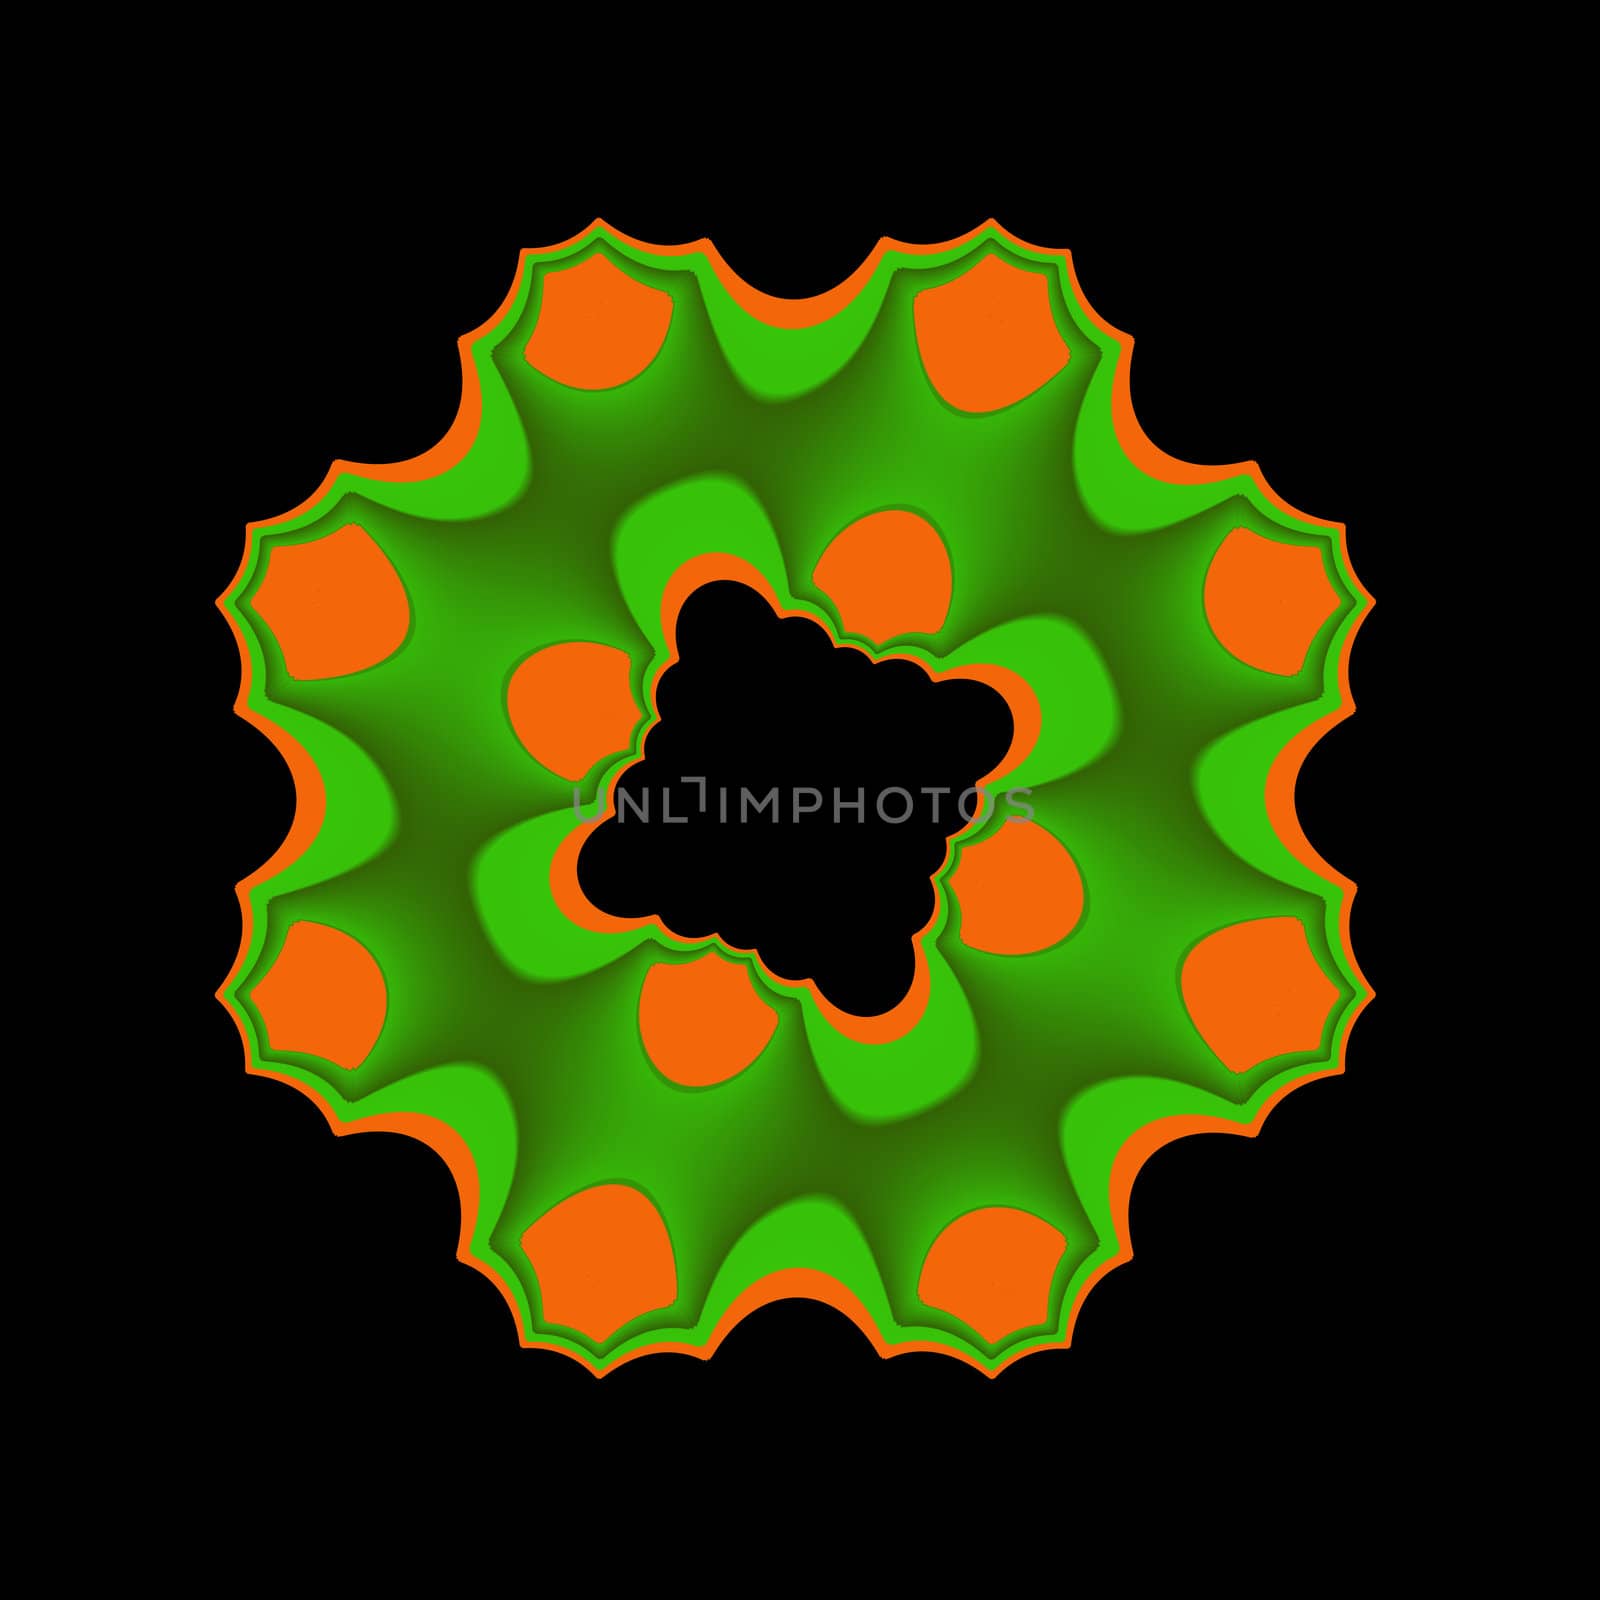 An abstract Image done in shades of green and orange.